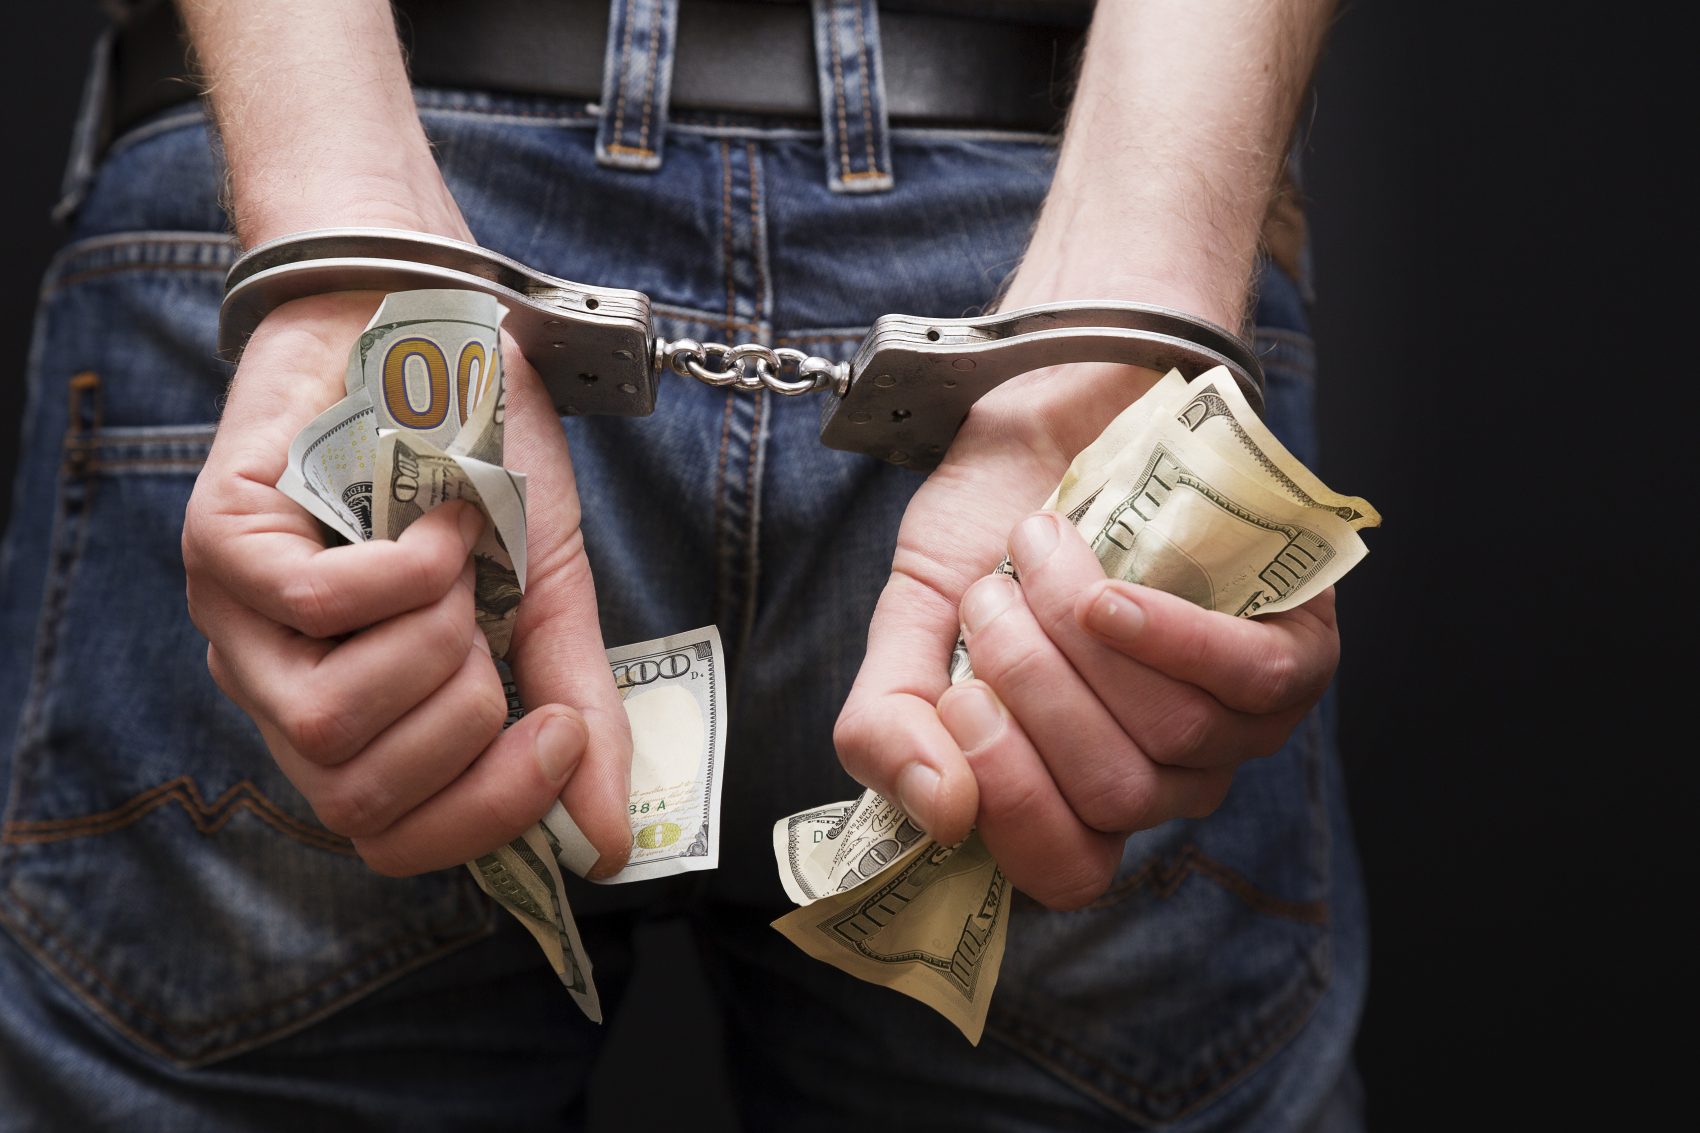 How Much Theft Is a Felony In Indiana?